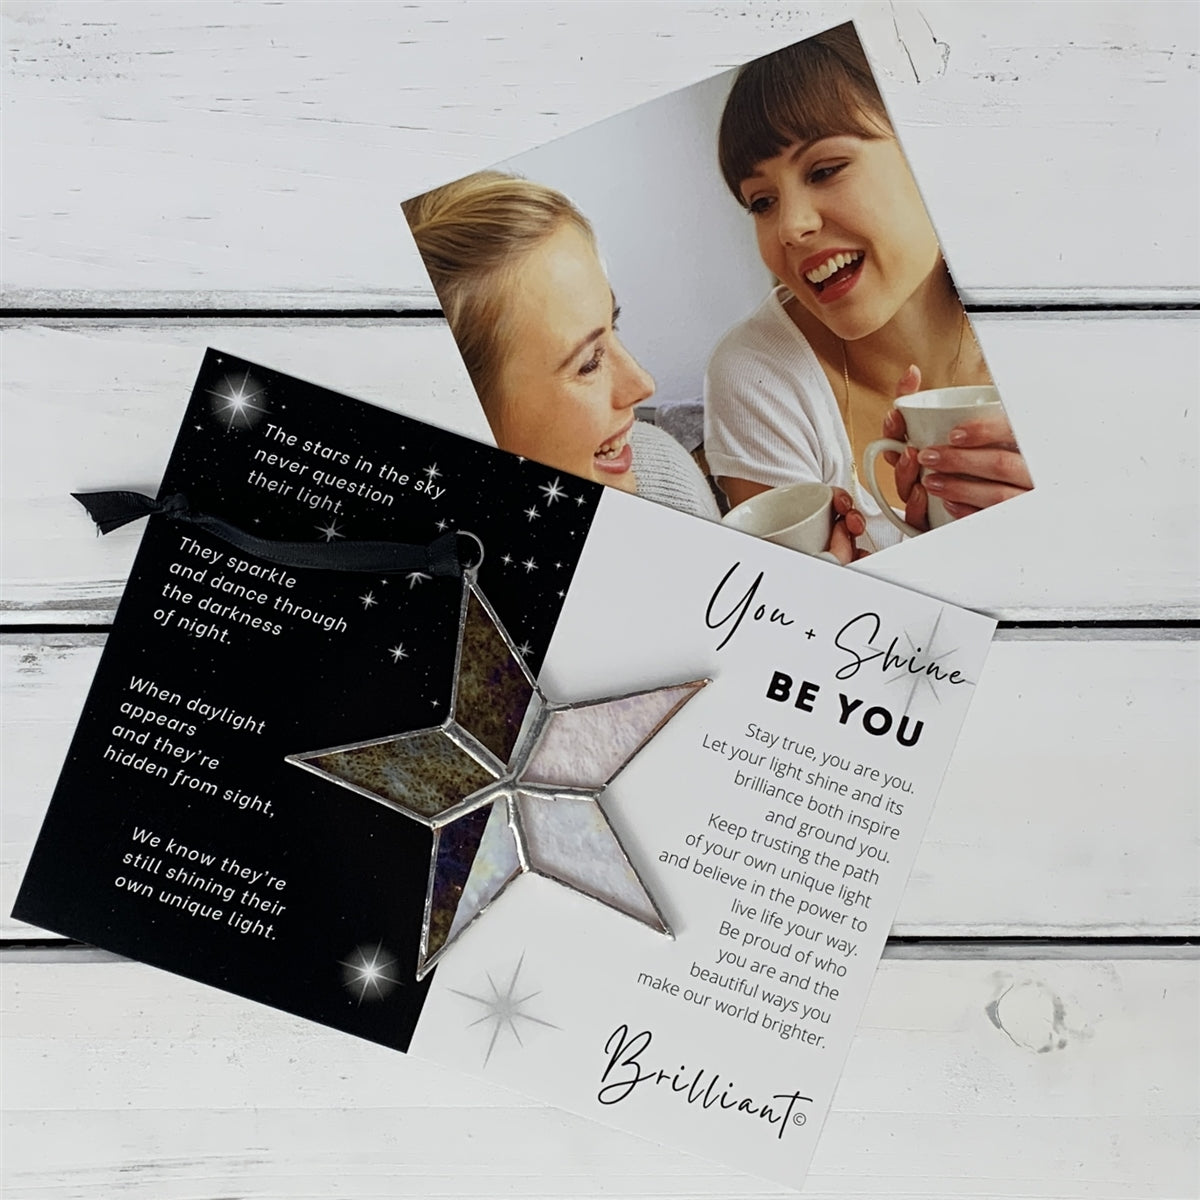 Be You star and artwork with the "You + Shine" poem on the left side and the "Be You" sentiment on the right side.